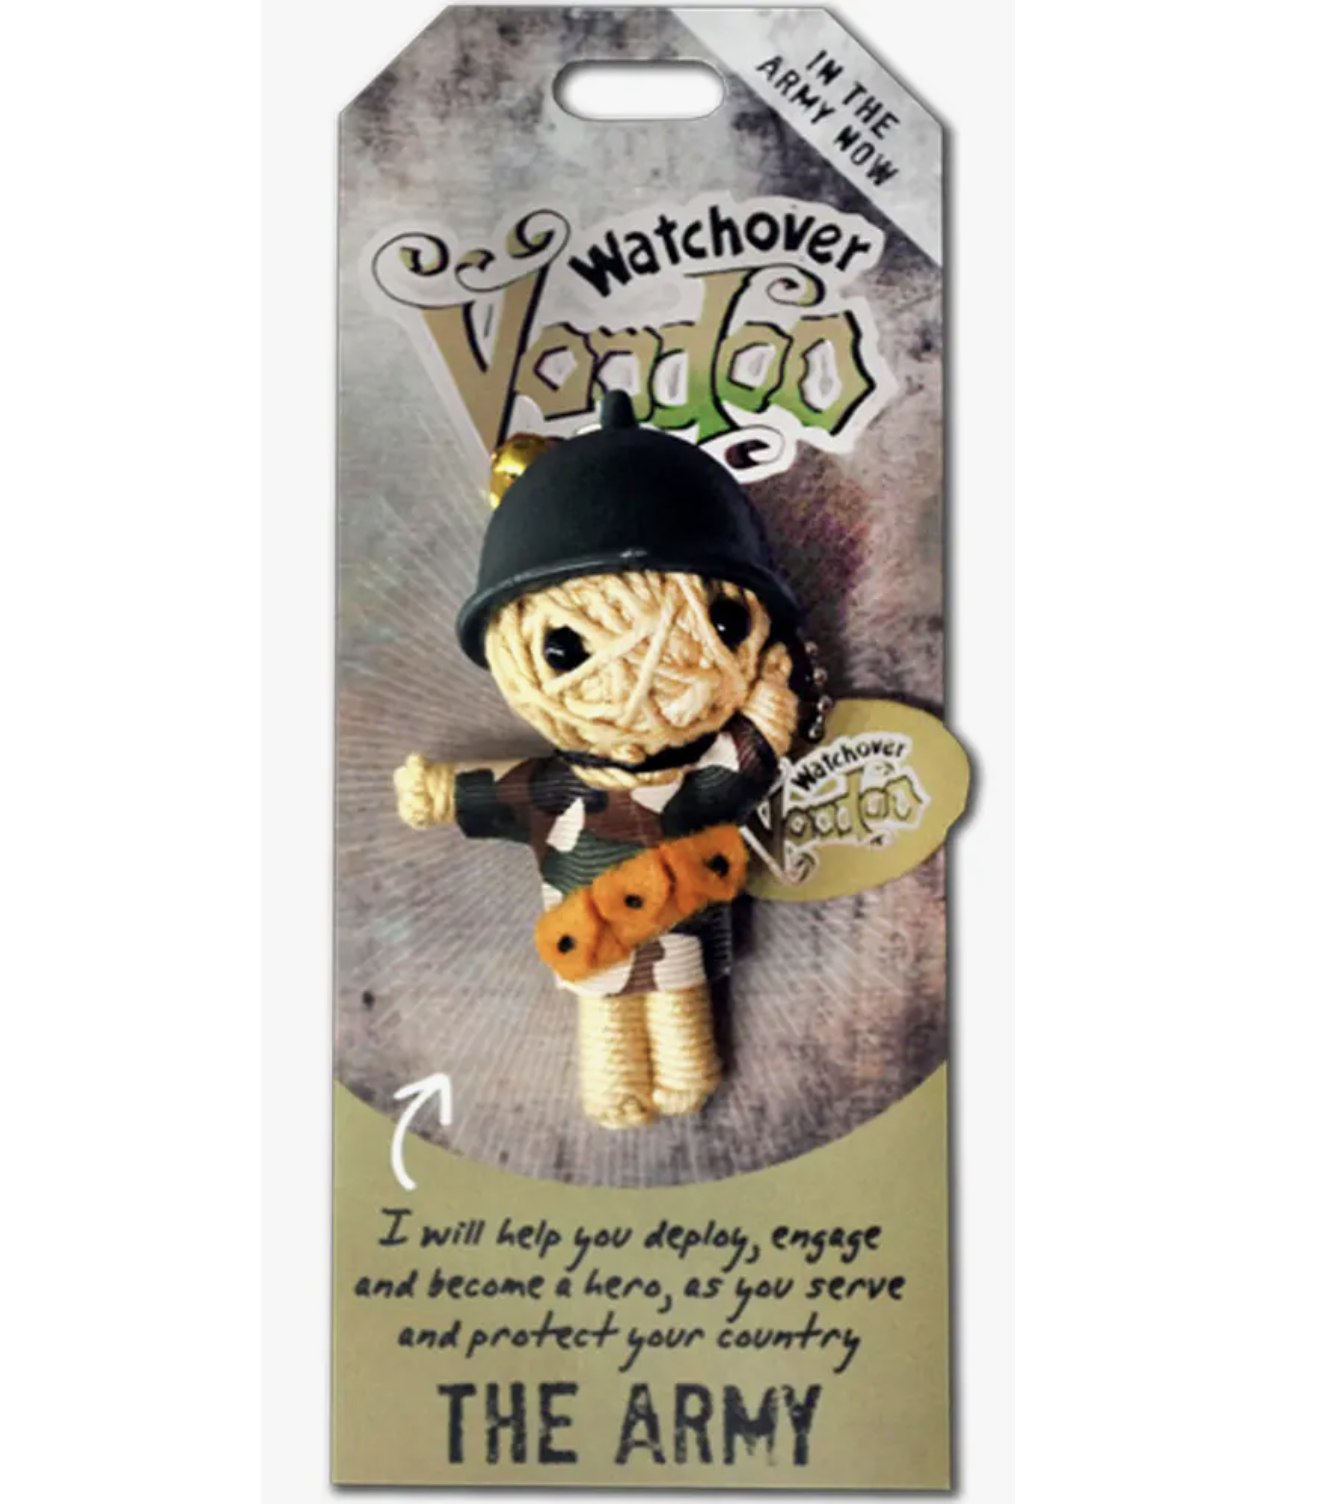 The Army Voodoo Doll